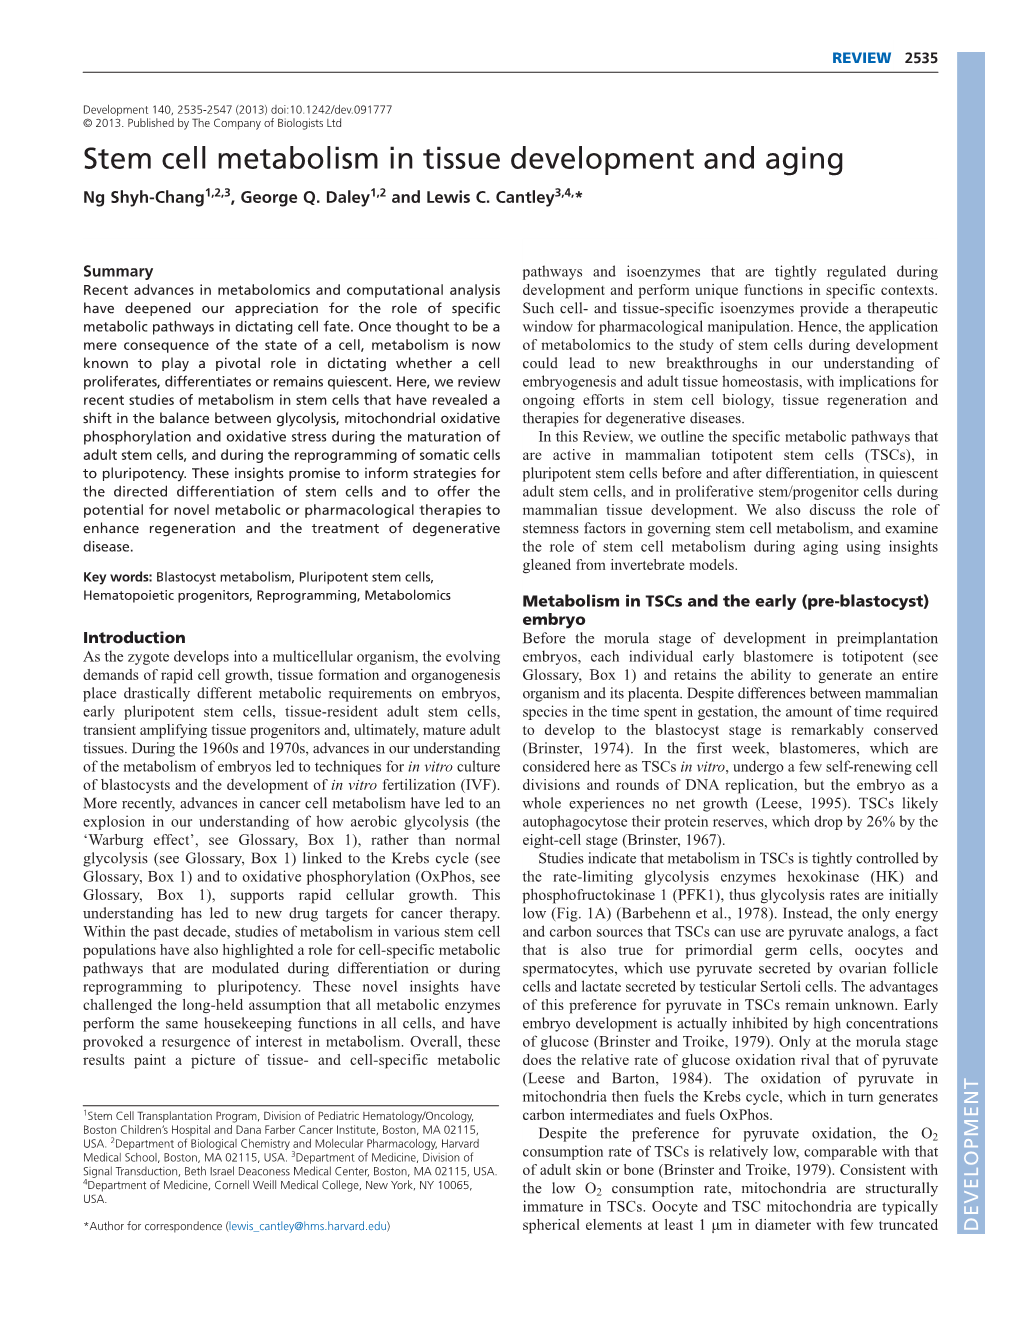 Stem Cell Metabolism in Tissue Development and Aging Ng Shyh-Chang1,2,3, George Q